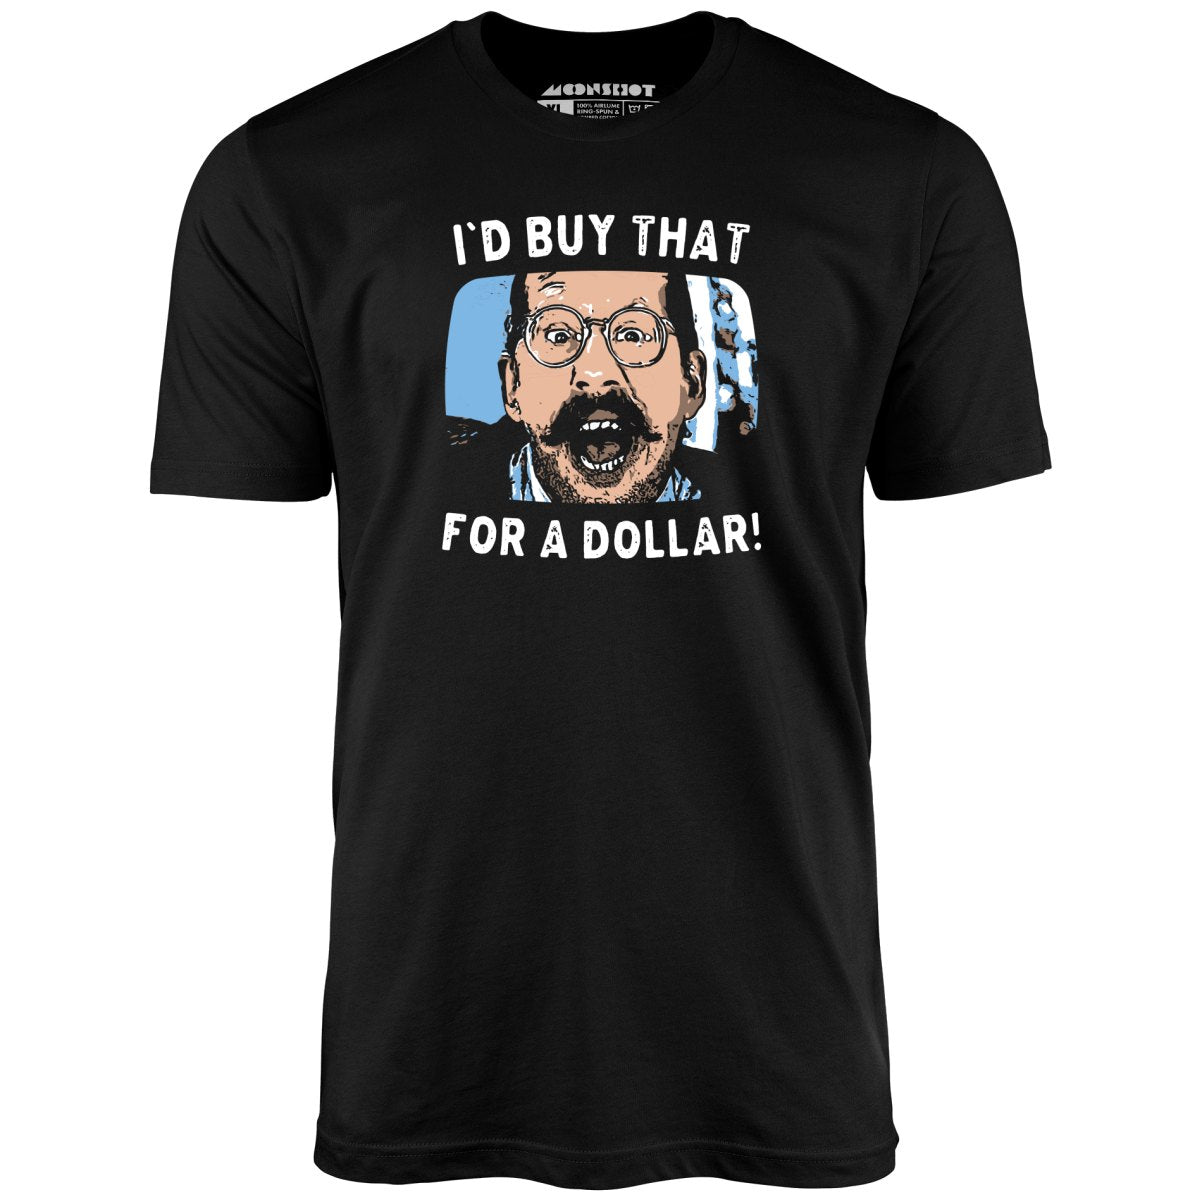 I'd Buy That For a Dollar - Unisex T-Shirt